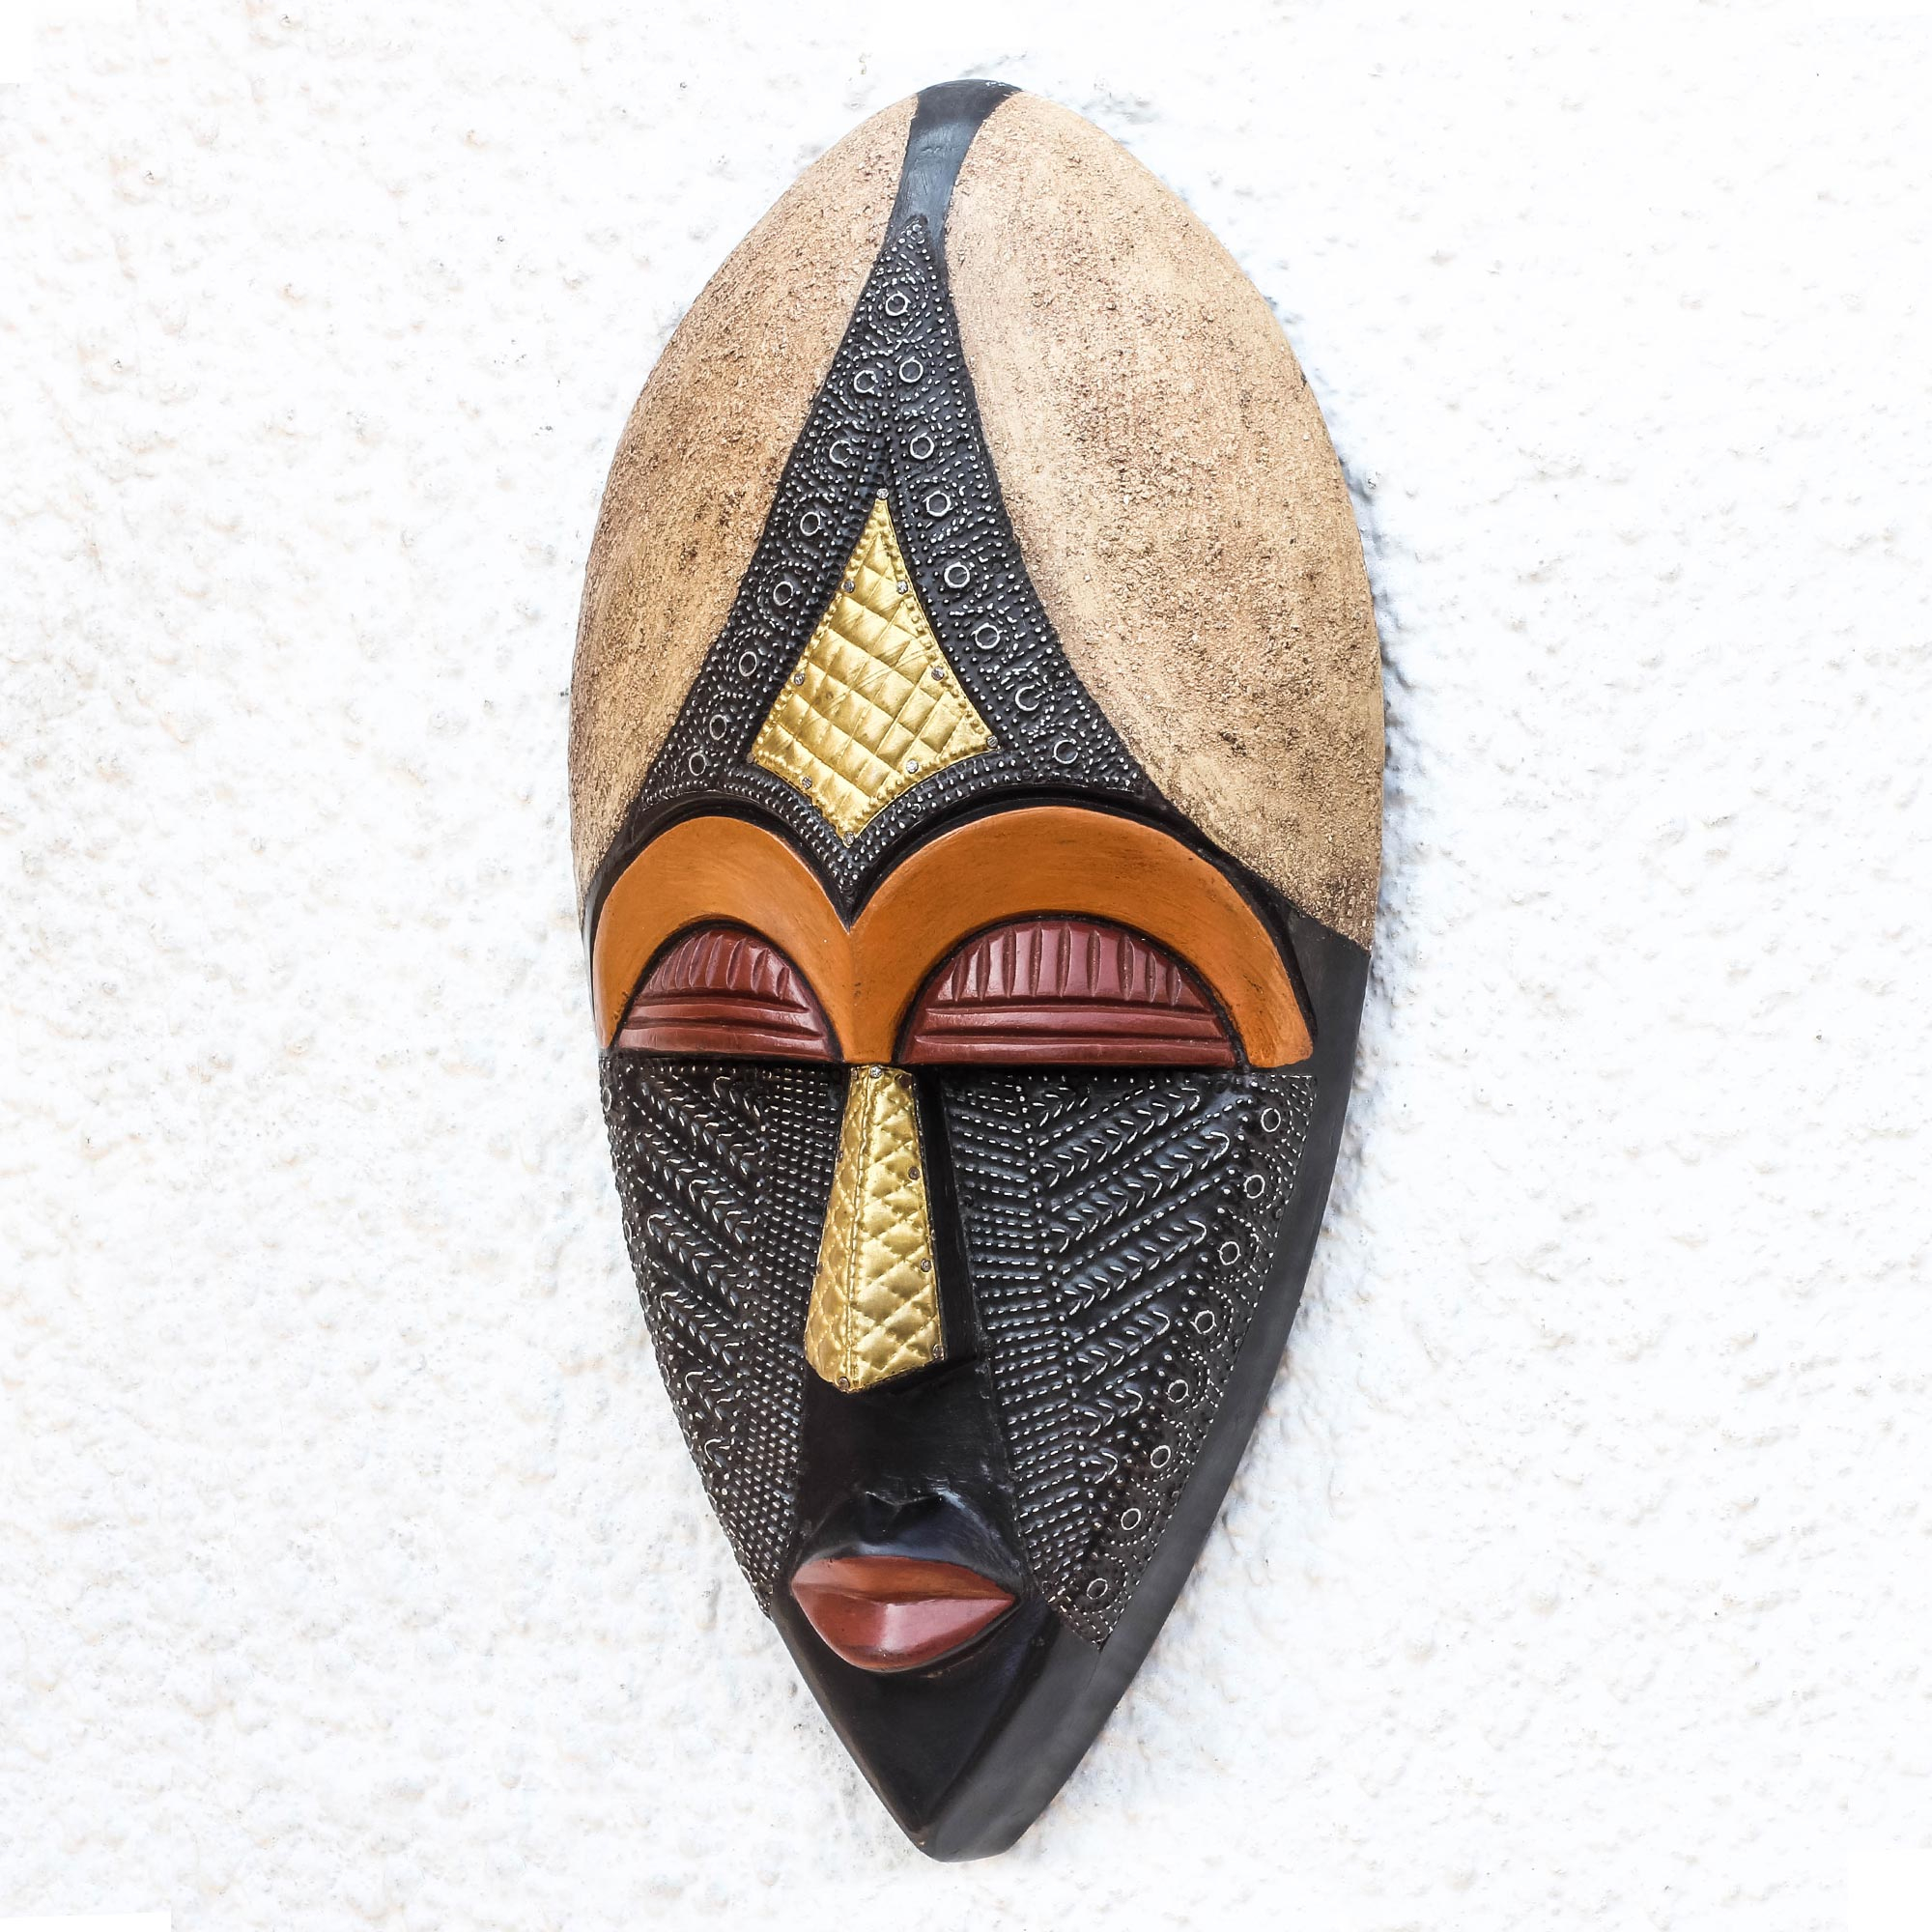 Multicolored African Wood Mask from Ghana - King of Africa | NOVICA